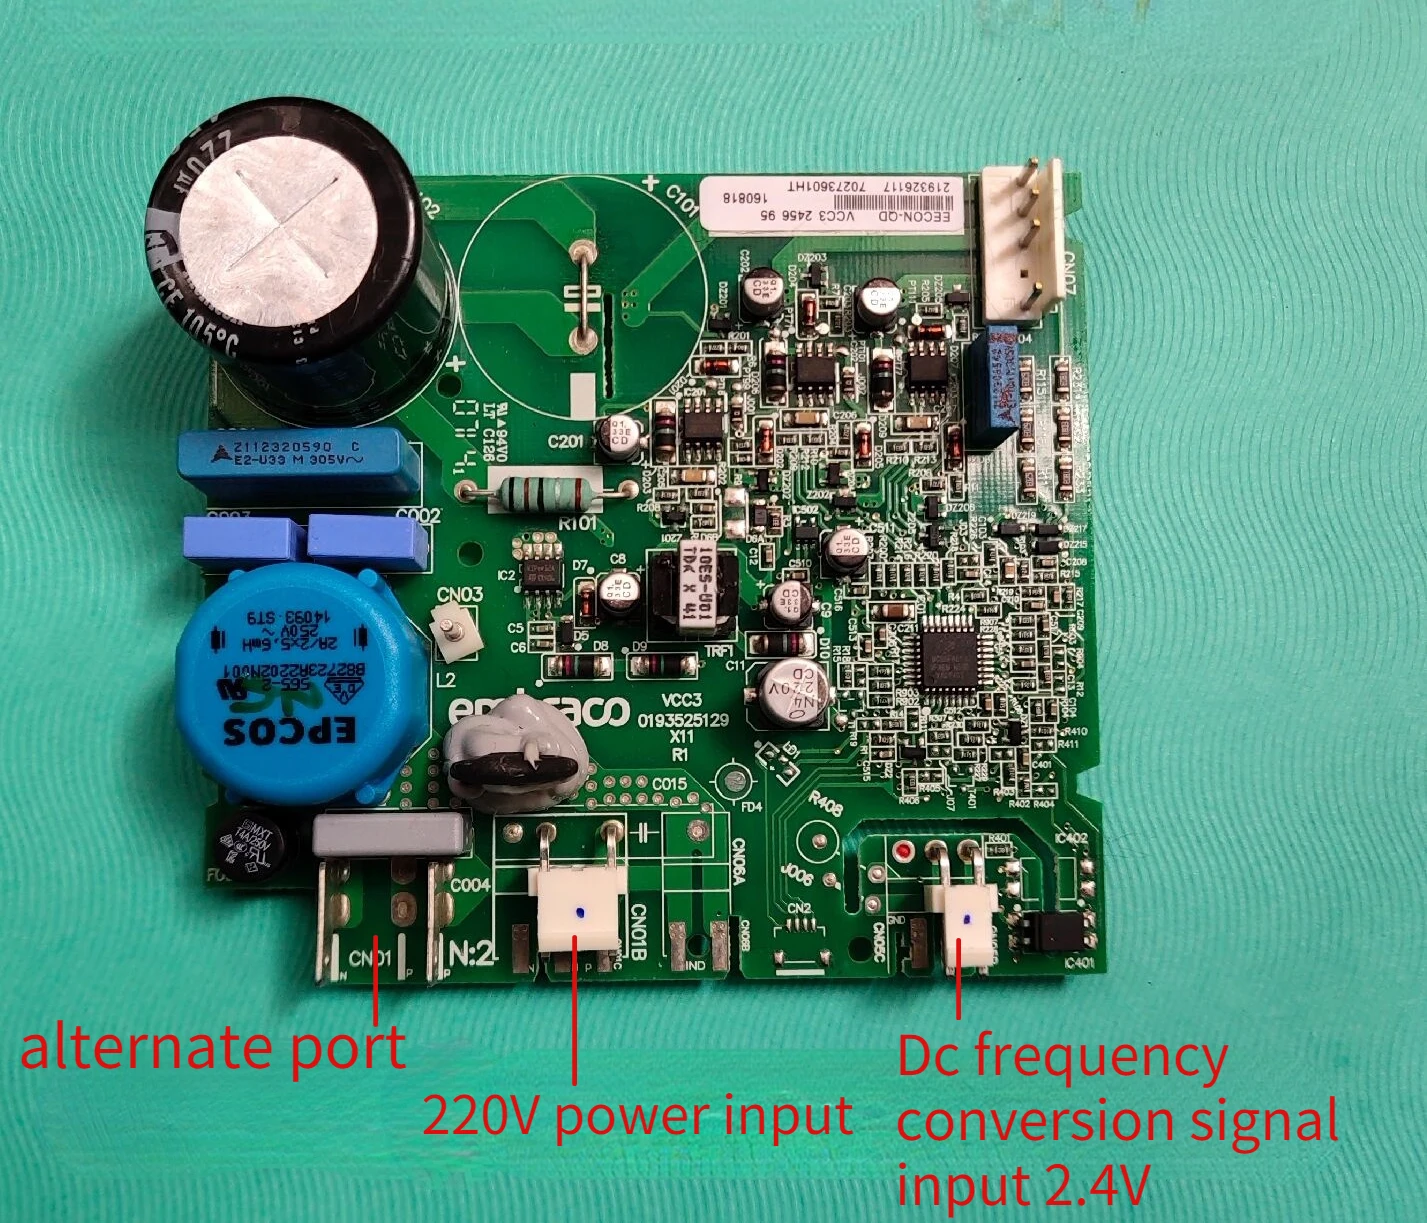 Applicable to Haier Refrigerator Frequency Conversion Board Eecon-qd Vcc3 2456 95 Control Drive Board 0193525078